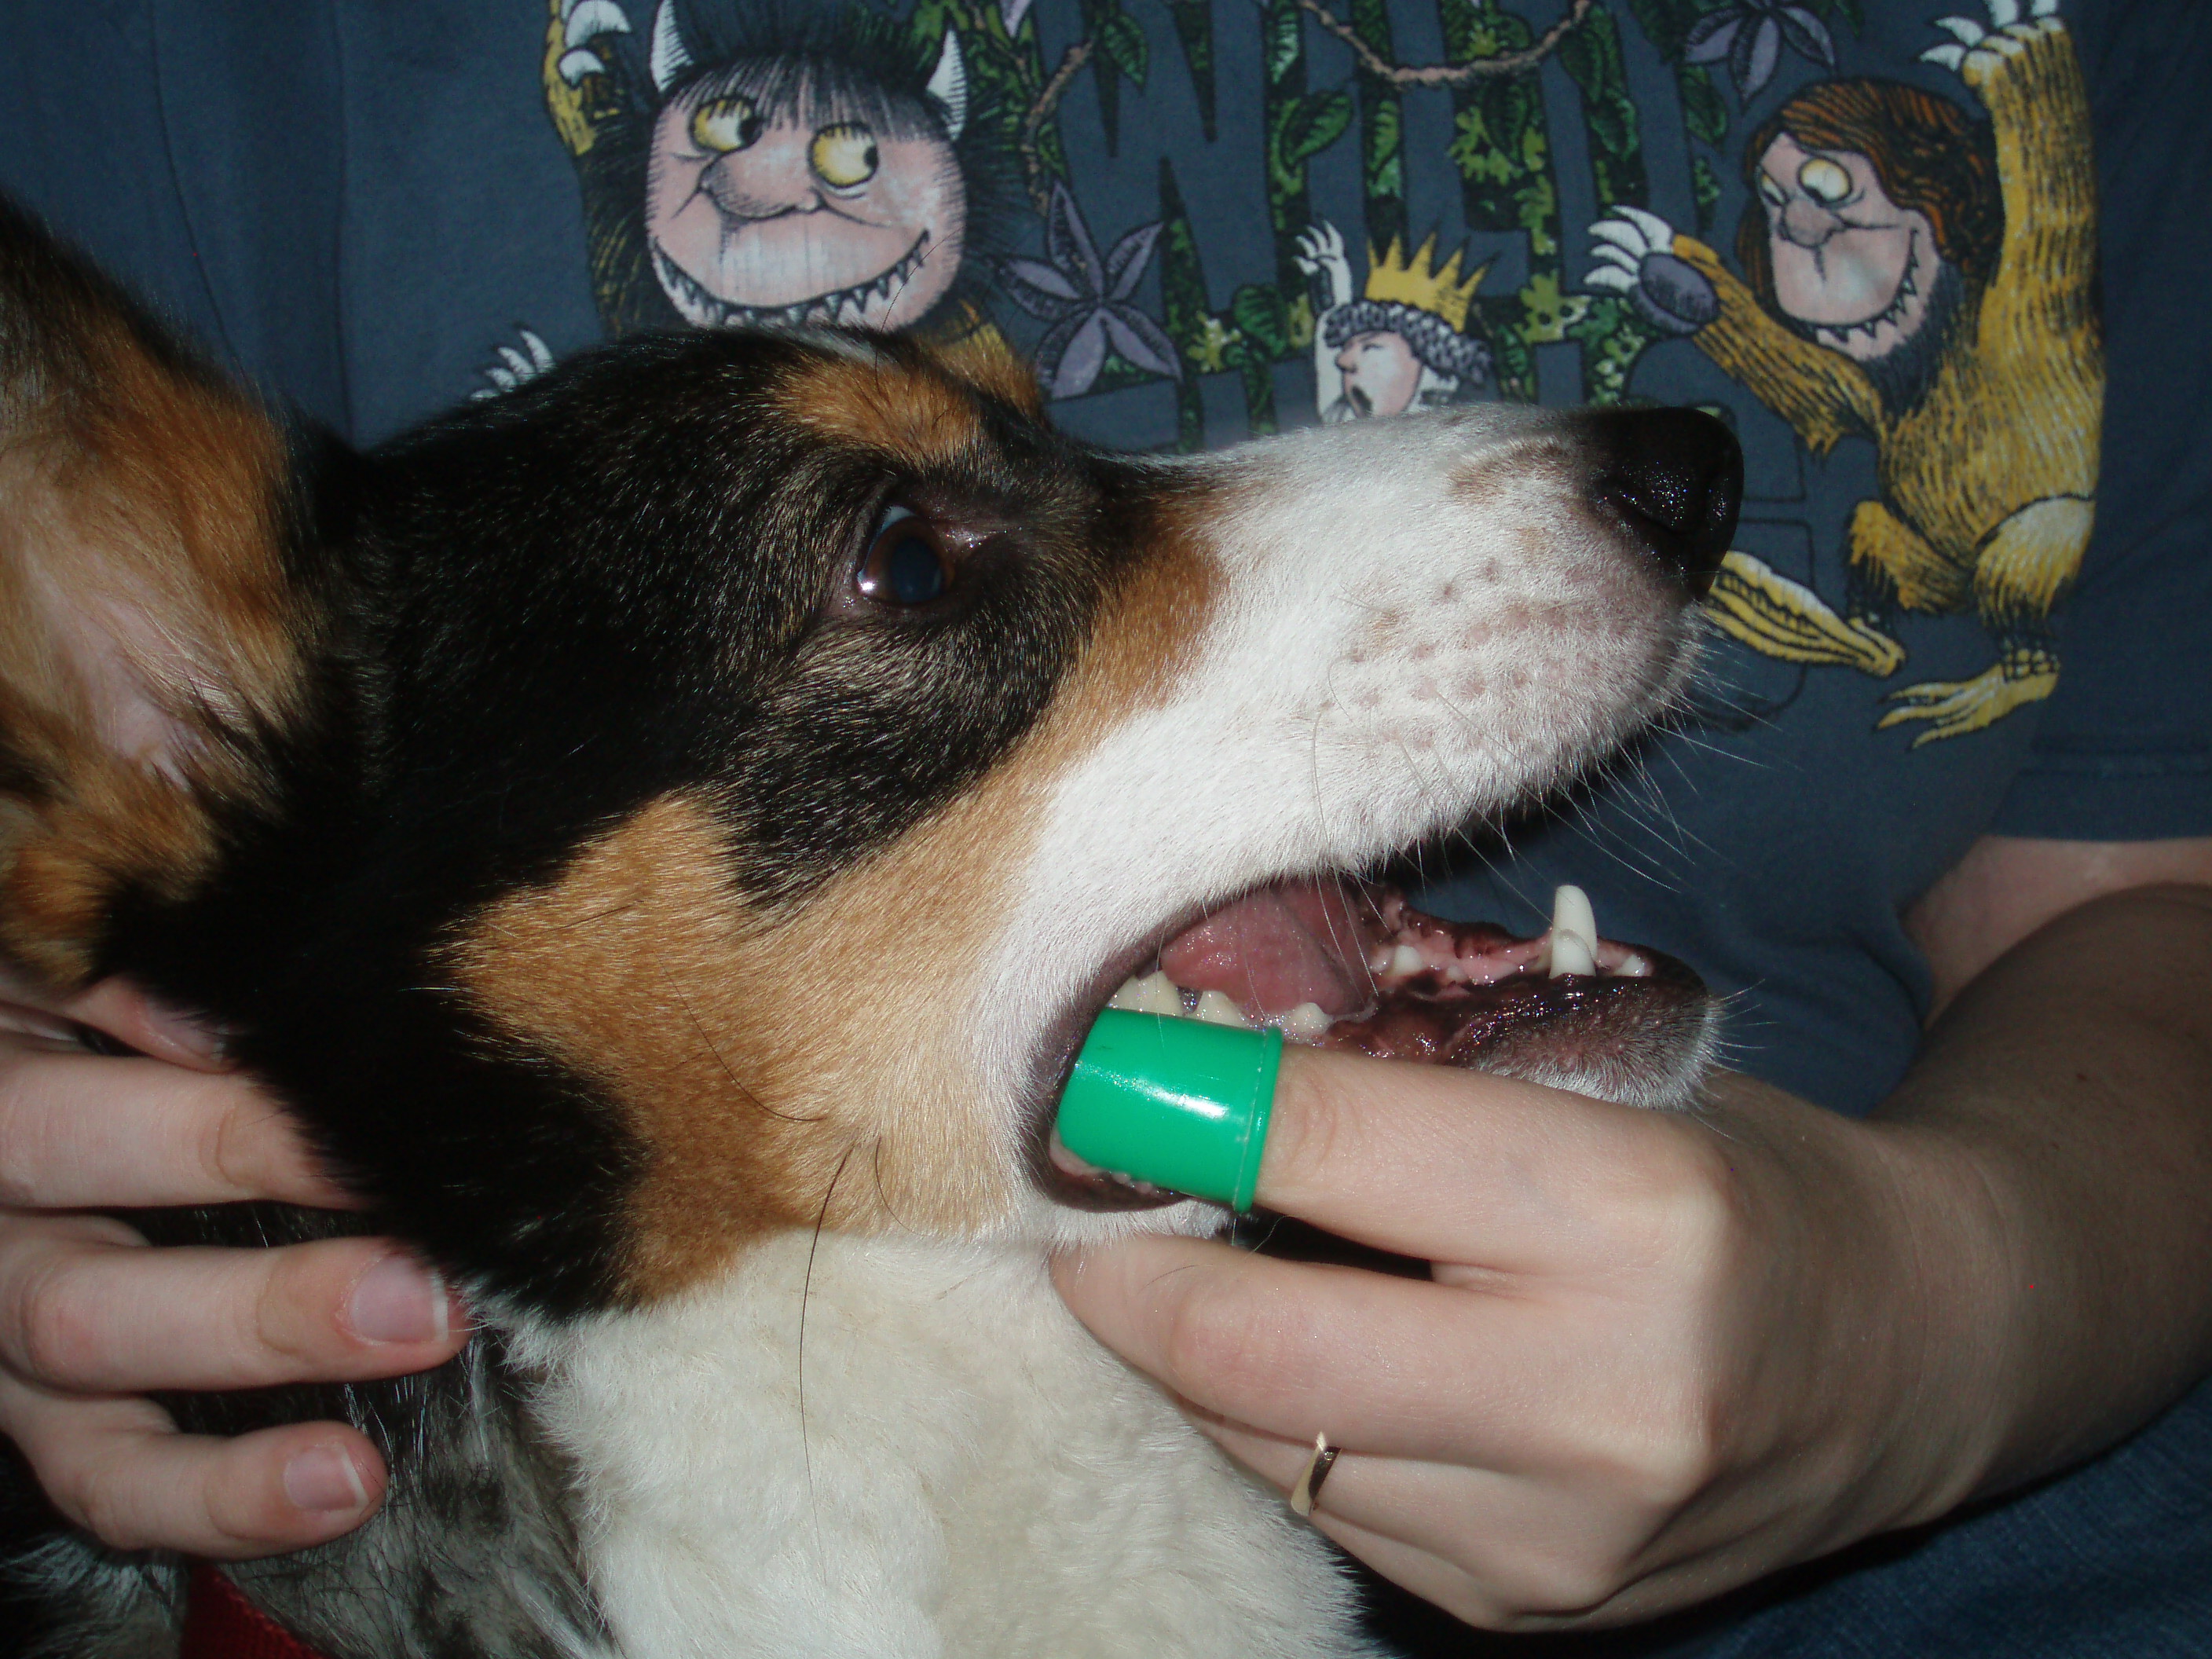 How to brush your dog's teeth